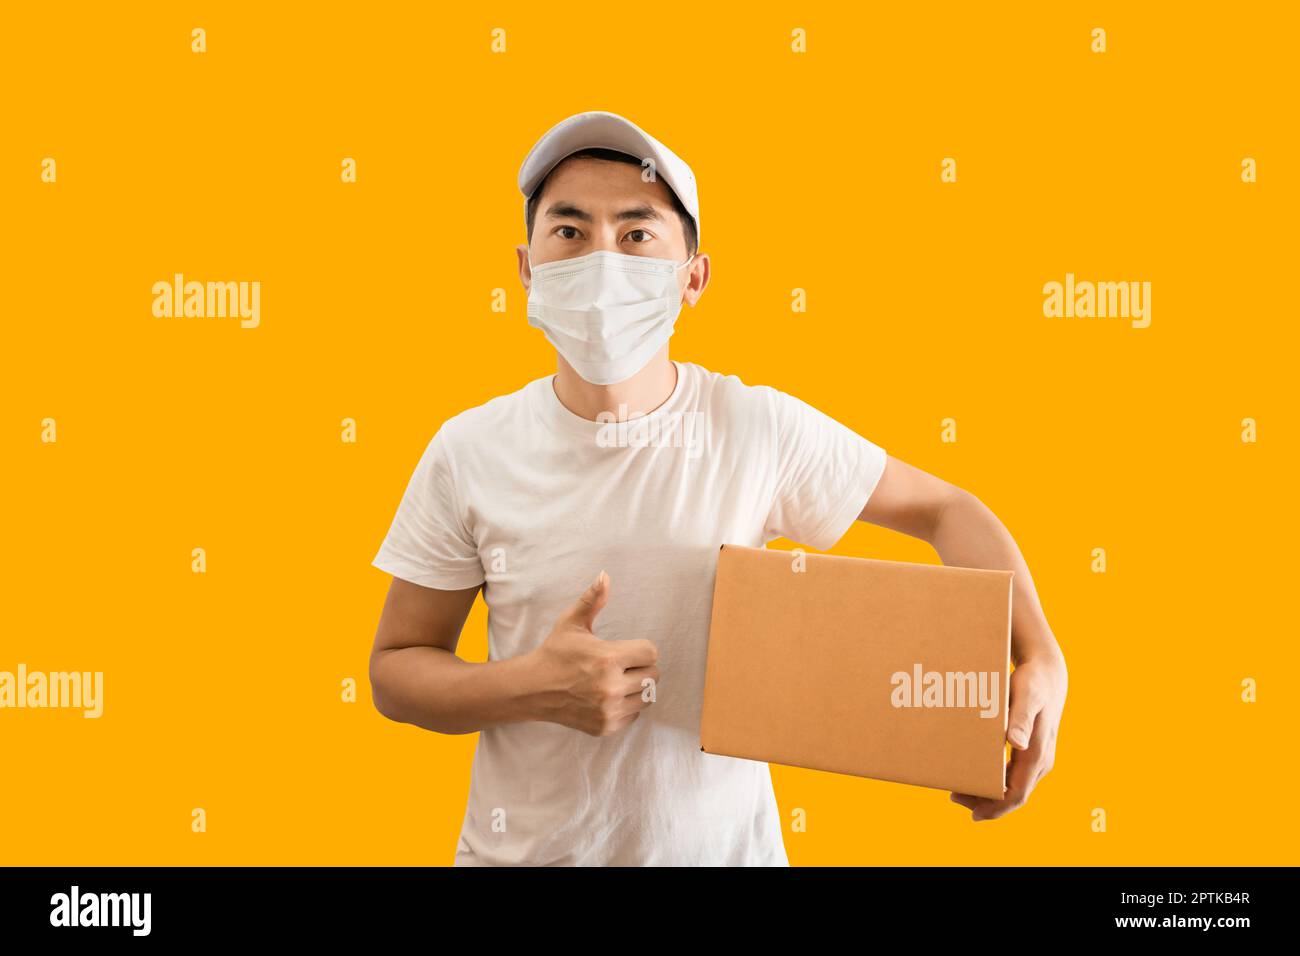 Young Asian delivery man wearing cap and white blank t-shirt holding parcel post box isolated on yellow background. express delivery service concept. Stock Photo